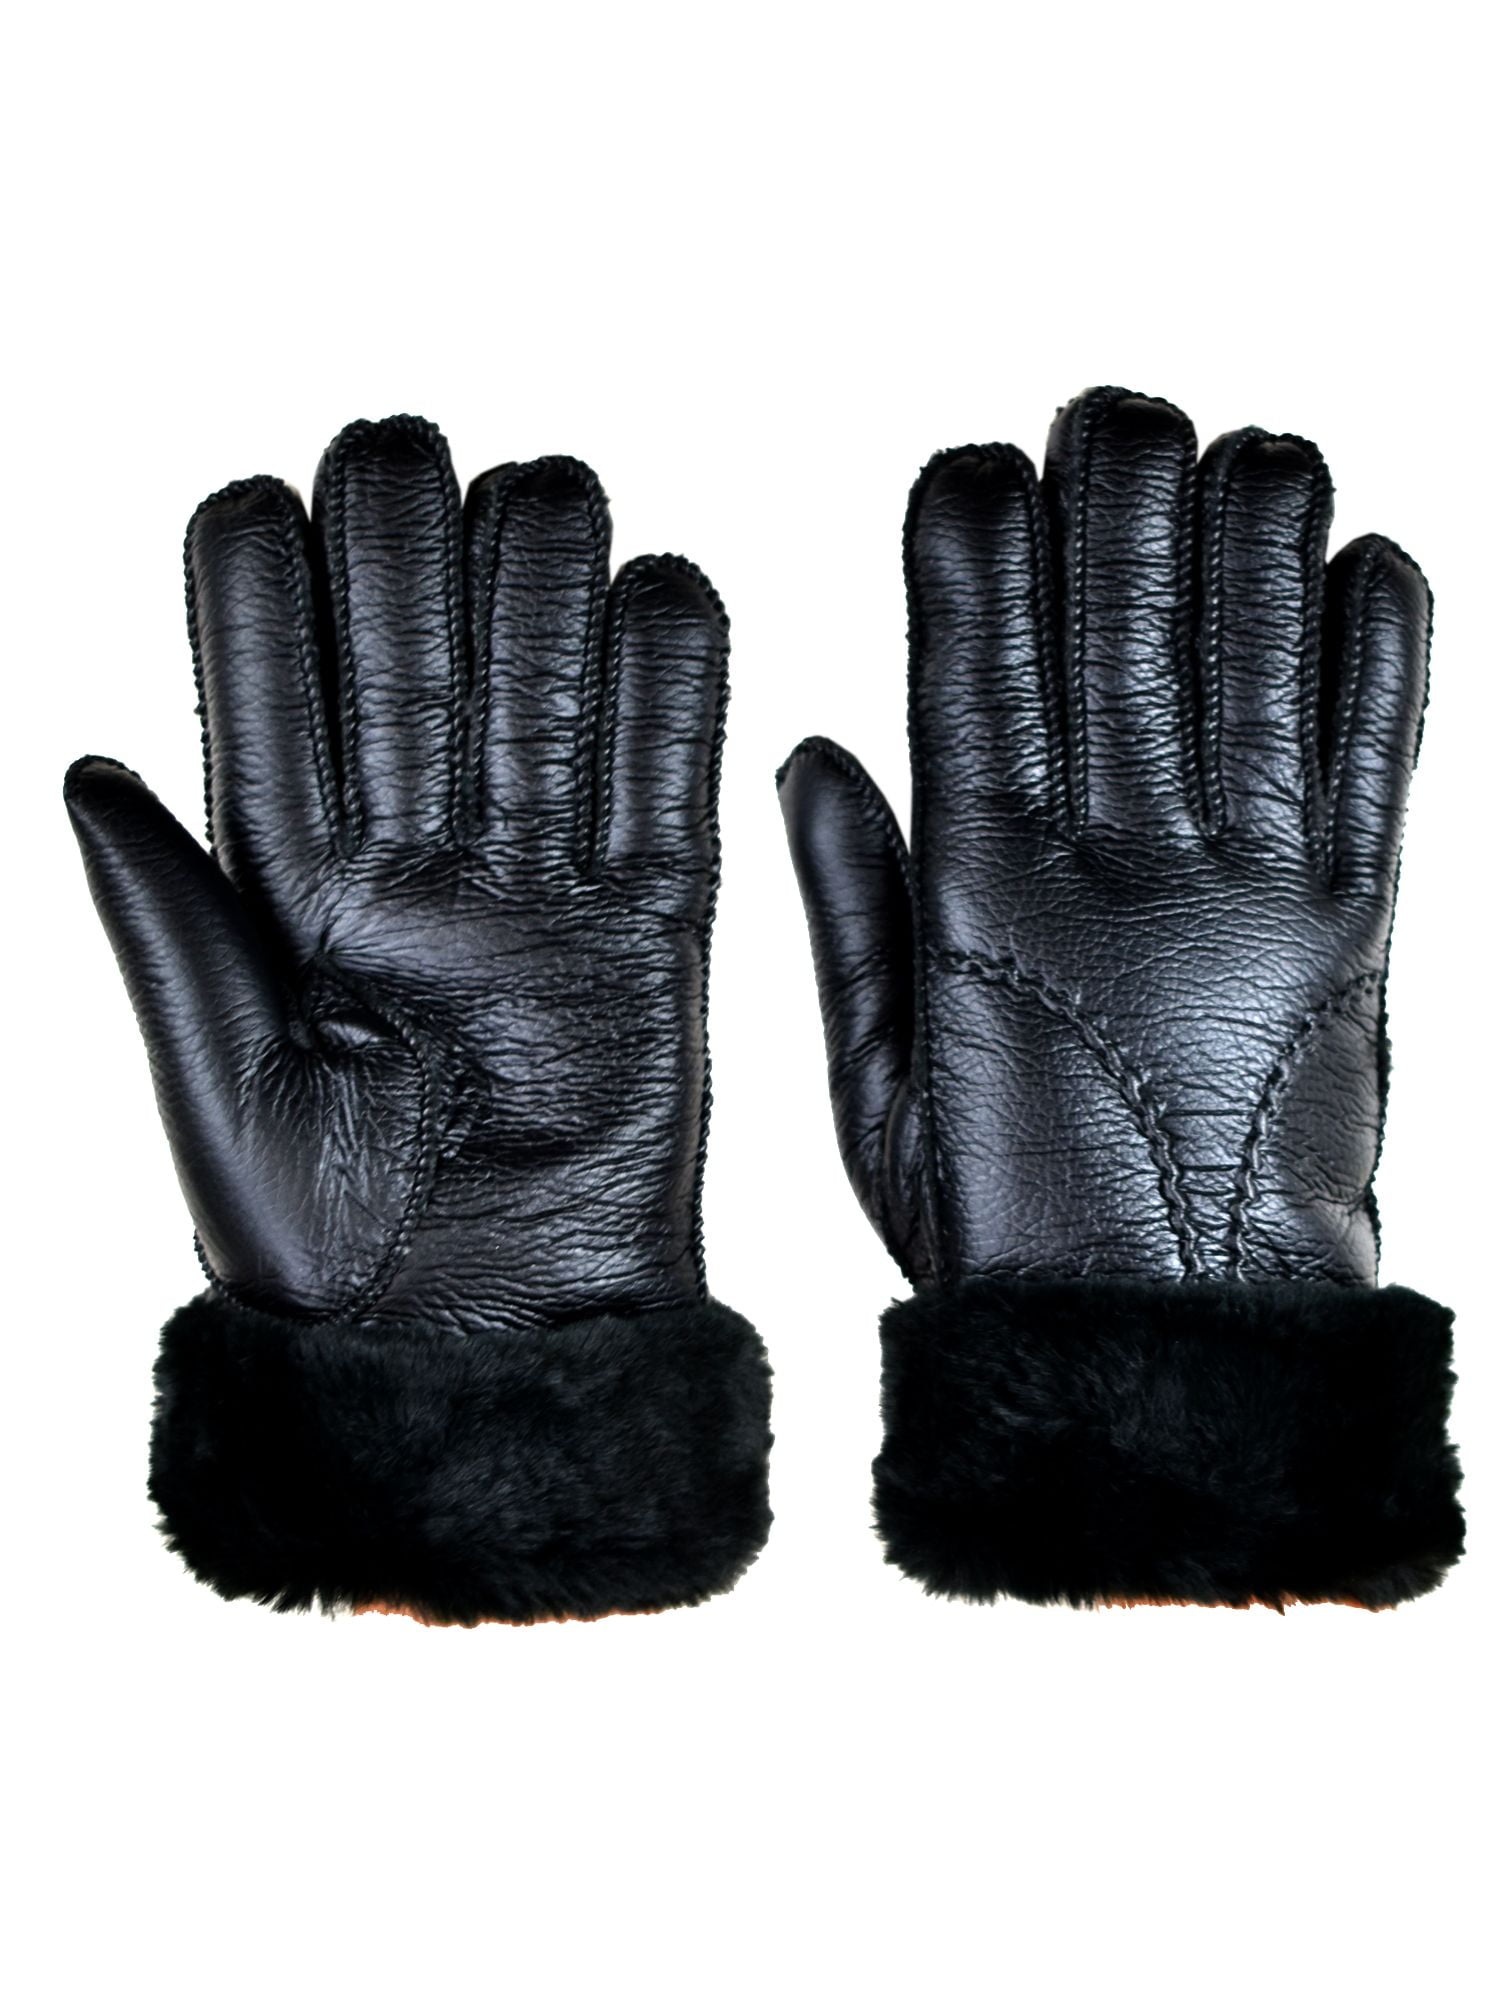 Ladies Touch Screen Gloves Genuine Leather With Fur Trim Women Winter Mittens 